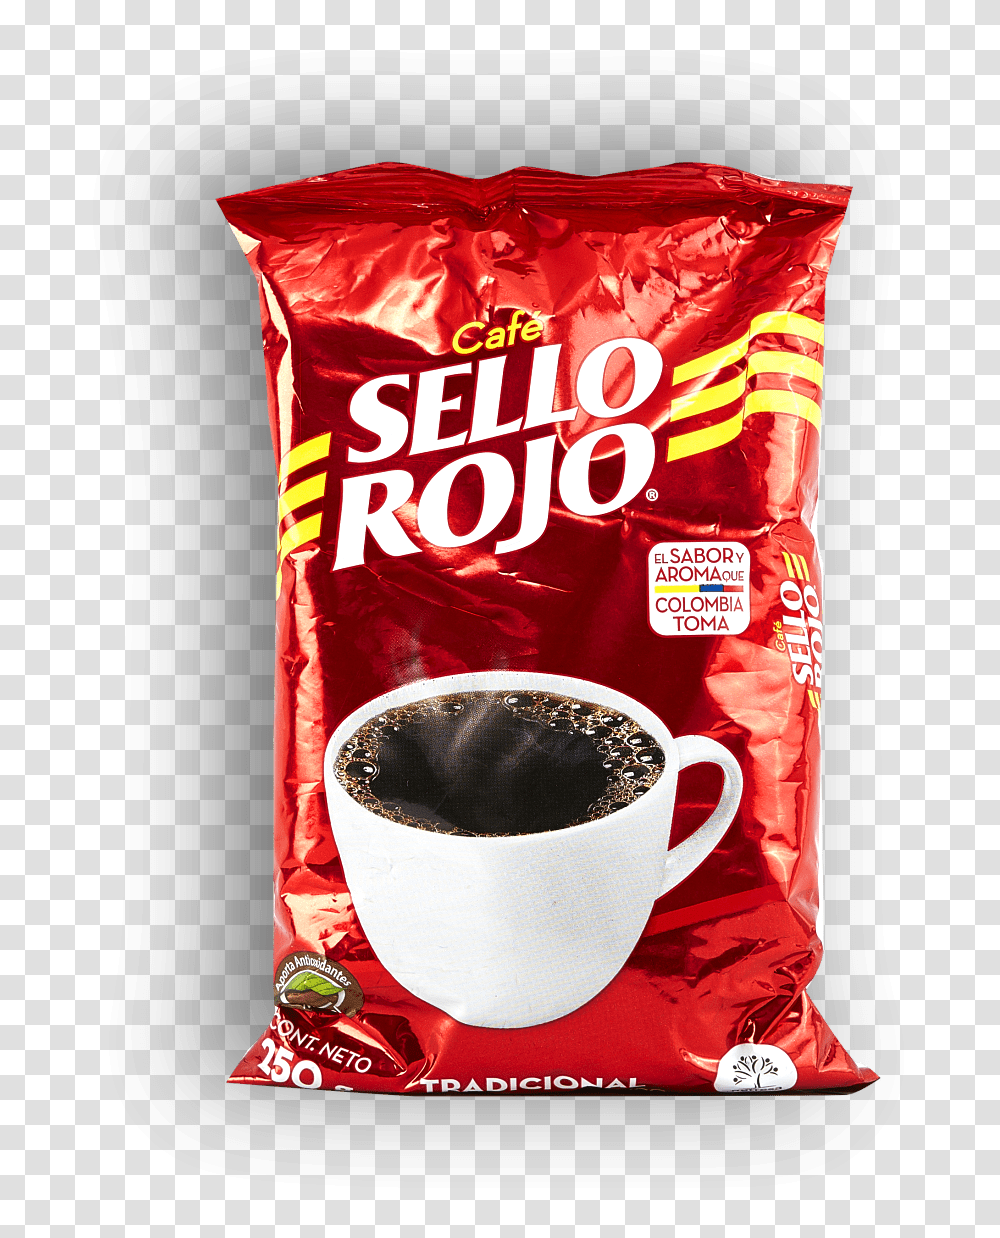 Caf Sello Rojo Tradicional Cafe Sello Rojo, Coffee Cup, Pottery, Saucer, Food Transparent Png